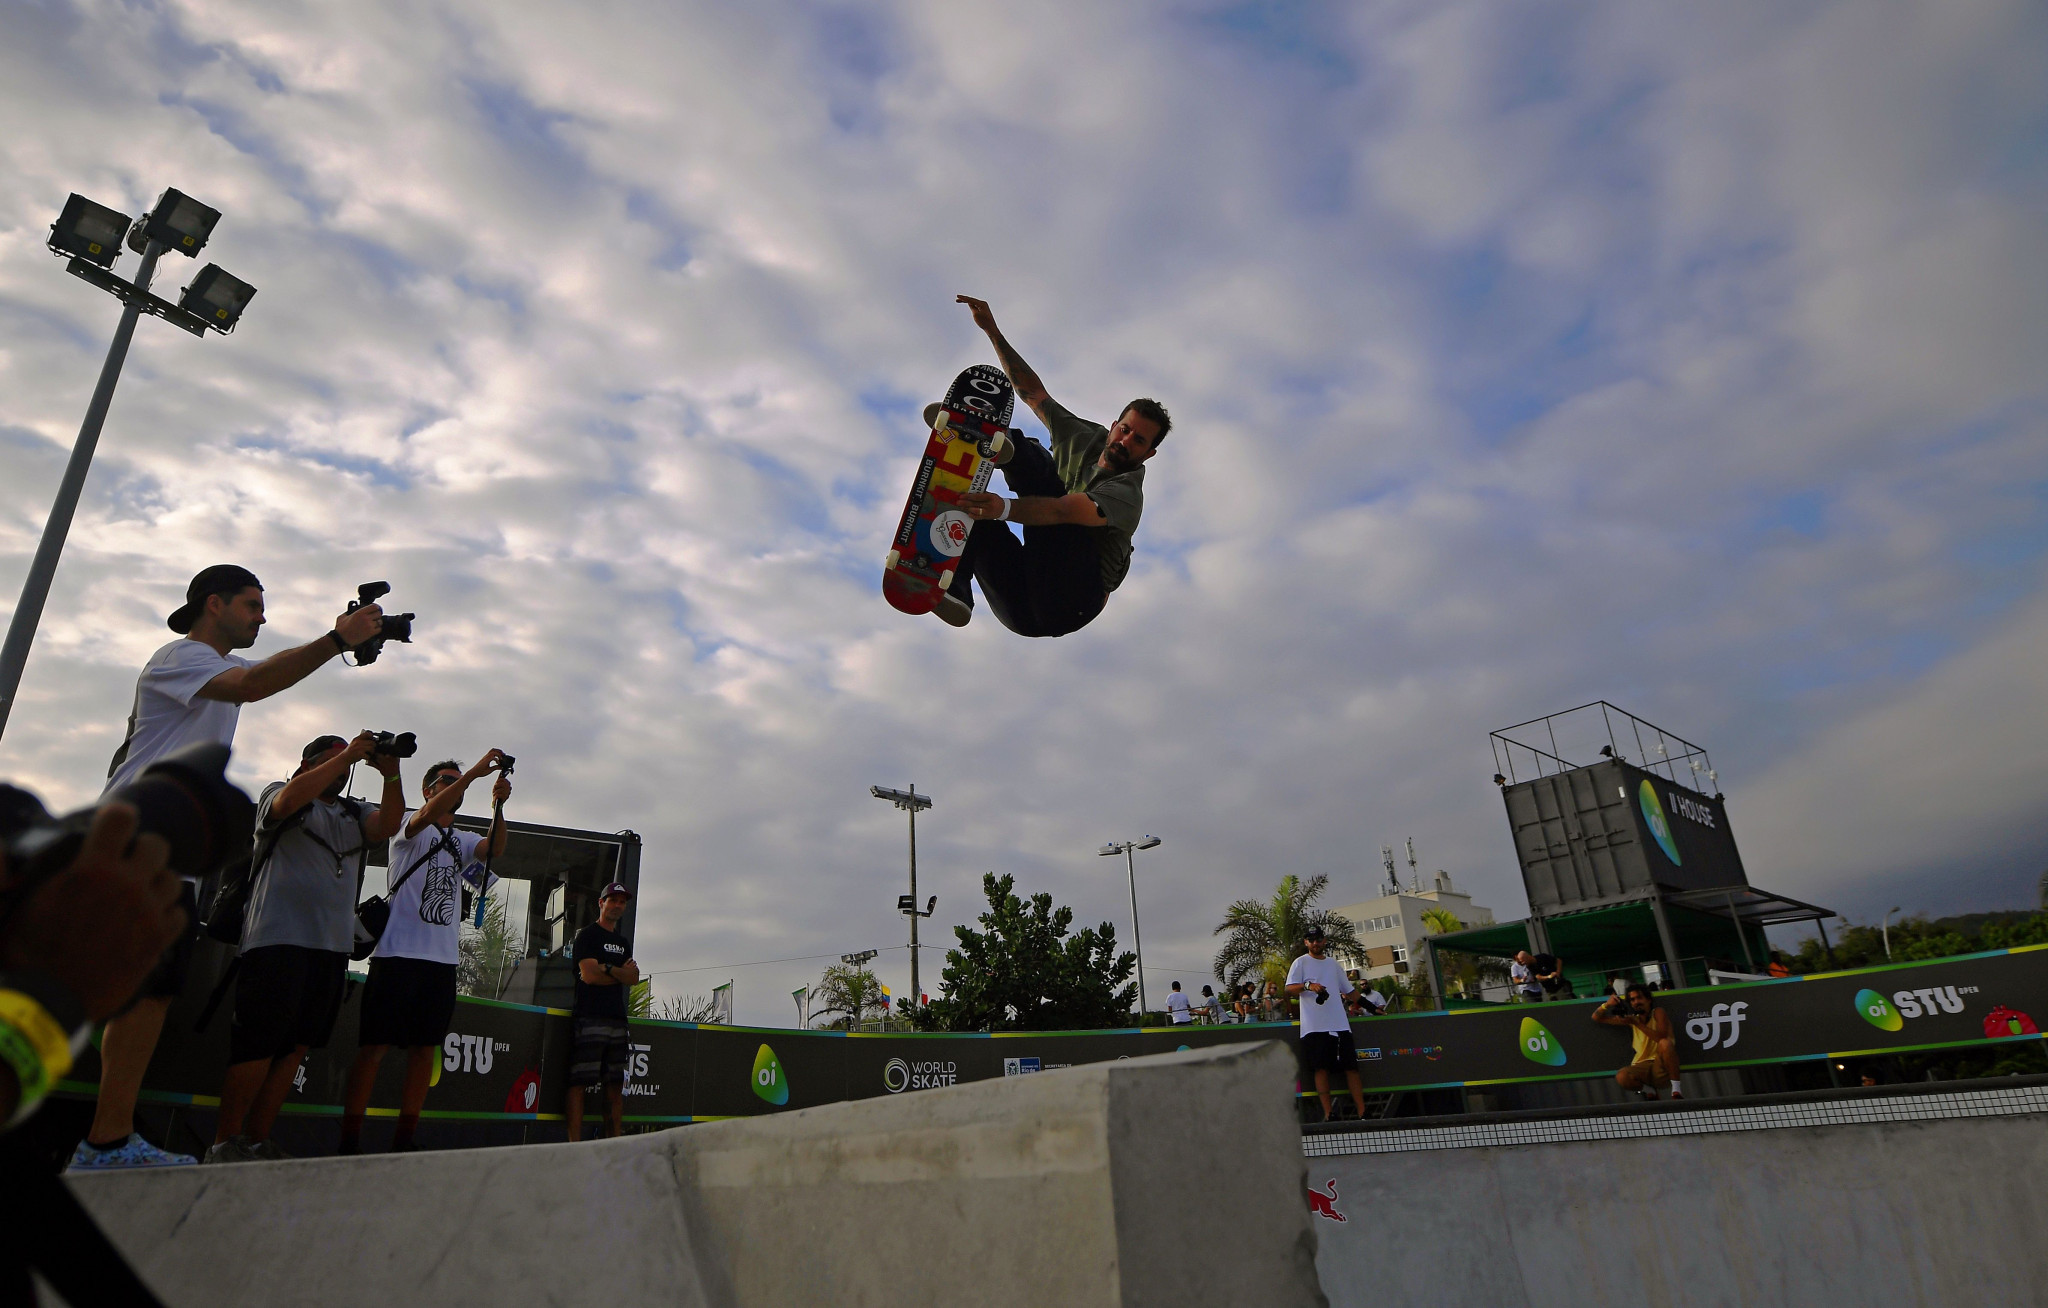 Skateboarding is on the programme at both the World Urban Games and World Beach Games ©Getty Images